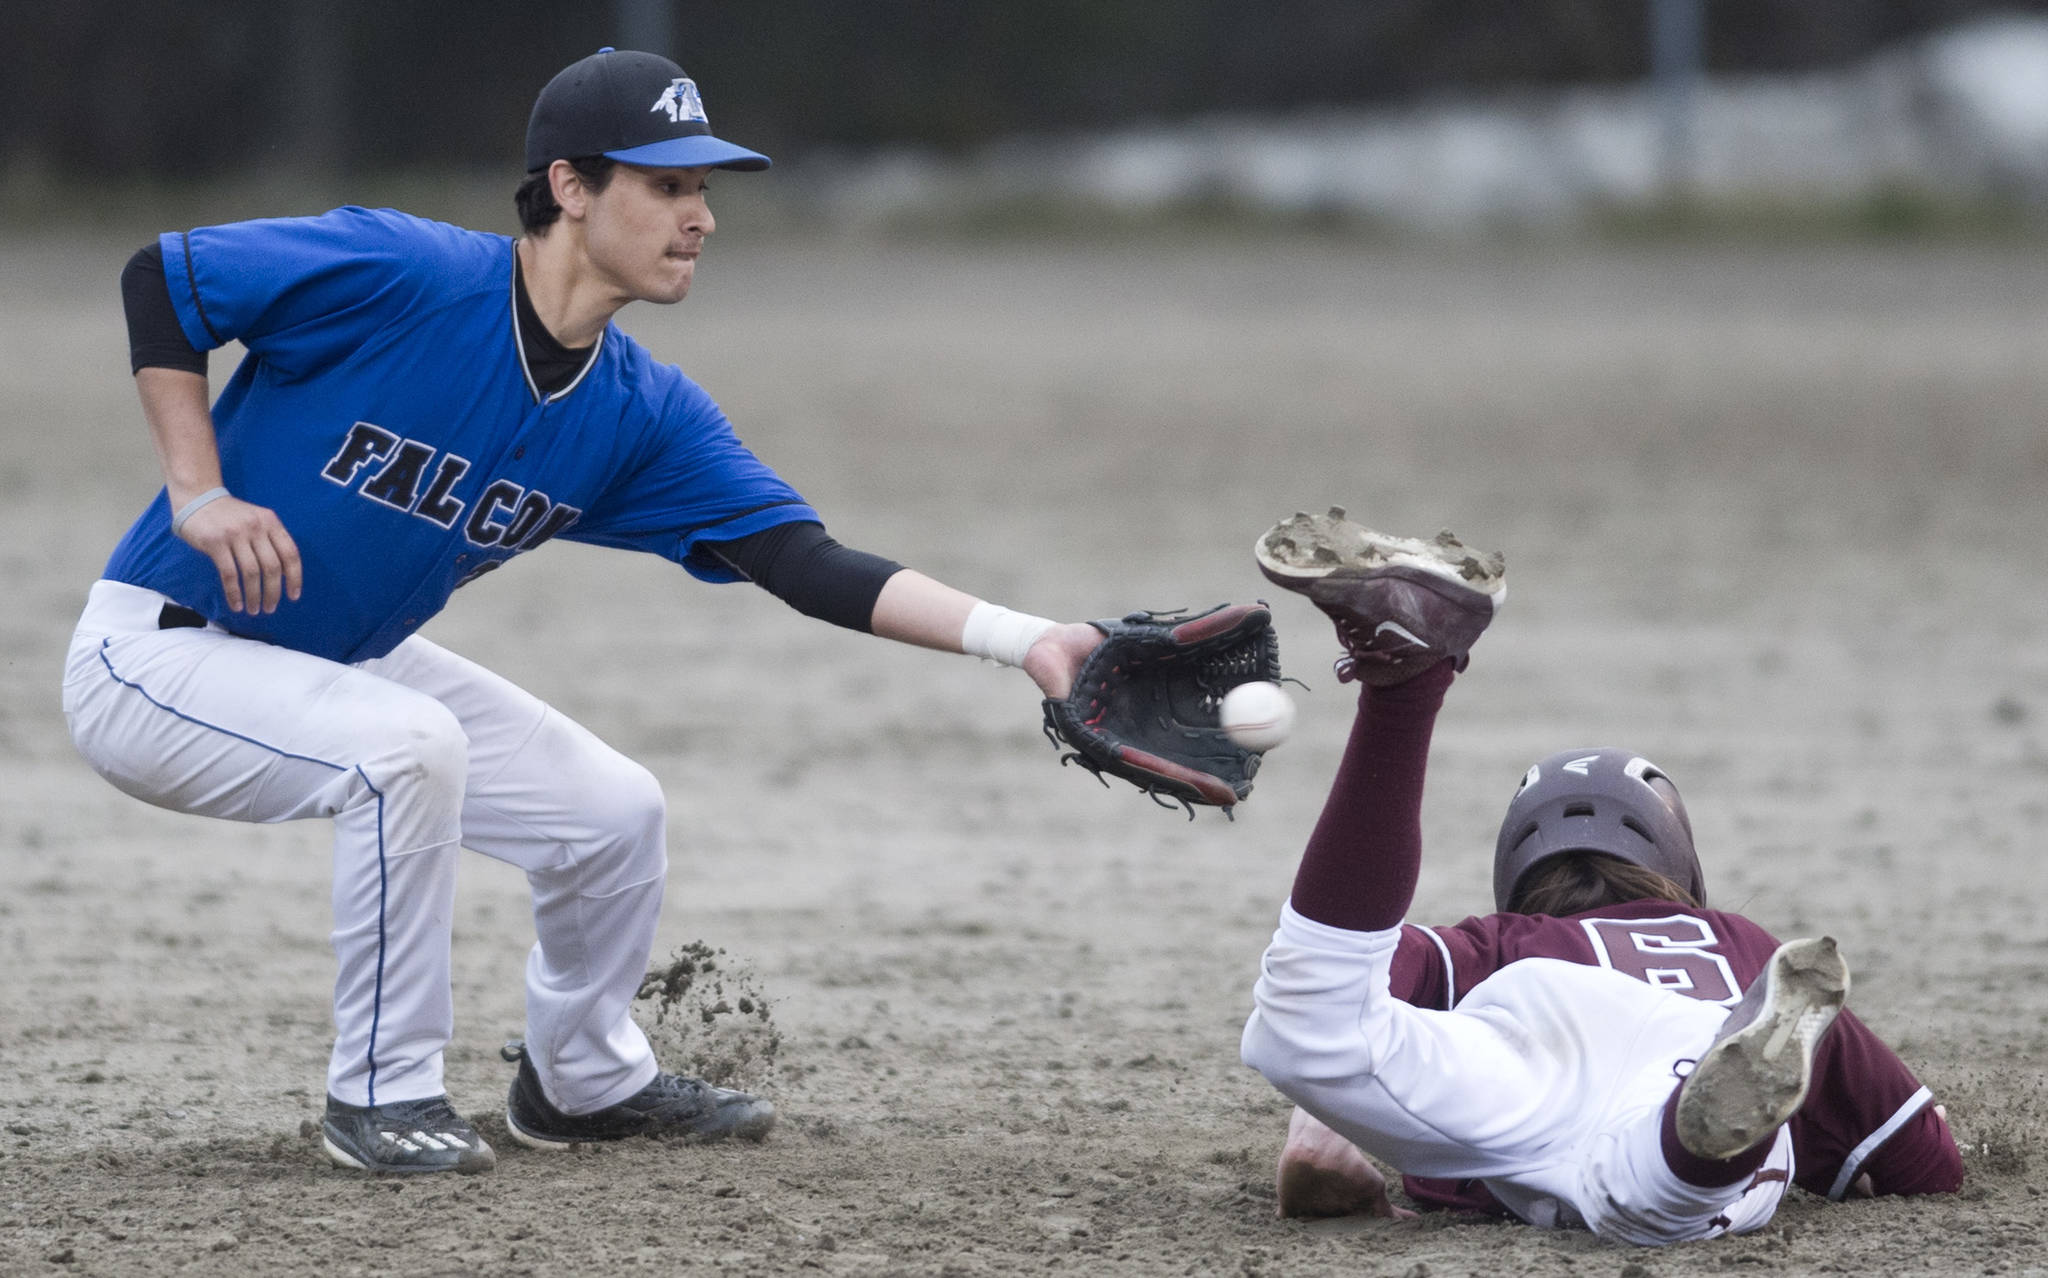 Ketchikan’s Liam Kiffer dives safely back to second base as Thunder Mountain’s Owen Mendoza receives the pick off throw in the third inning at Adair-Kennedy Memorial Park on Friday, May 5, 2017. (Michael Penn | Juneau Empire)